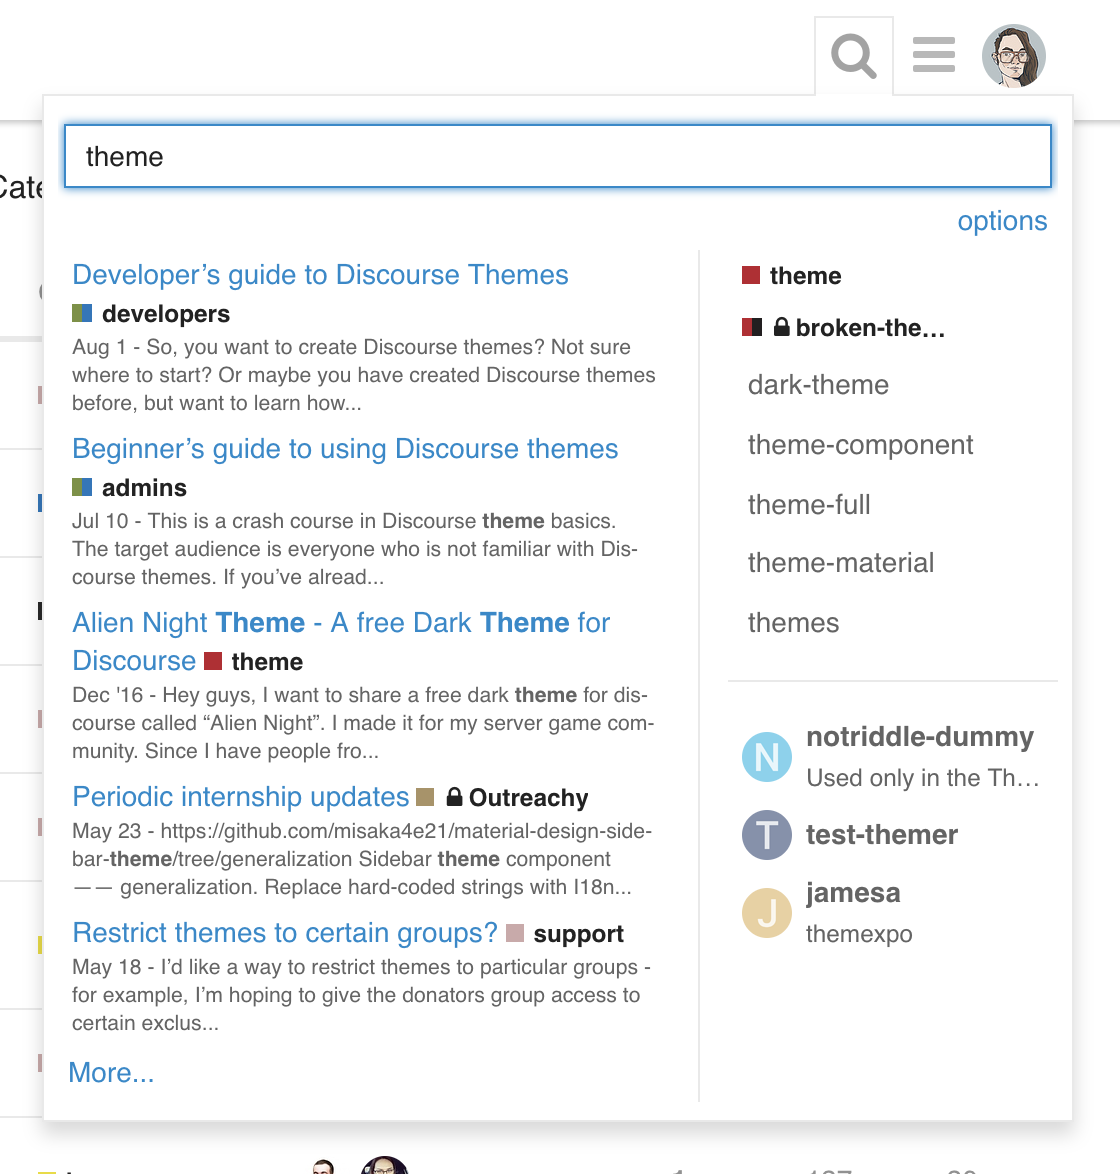 improved search layout in Discourse 2.2